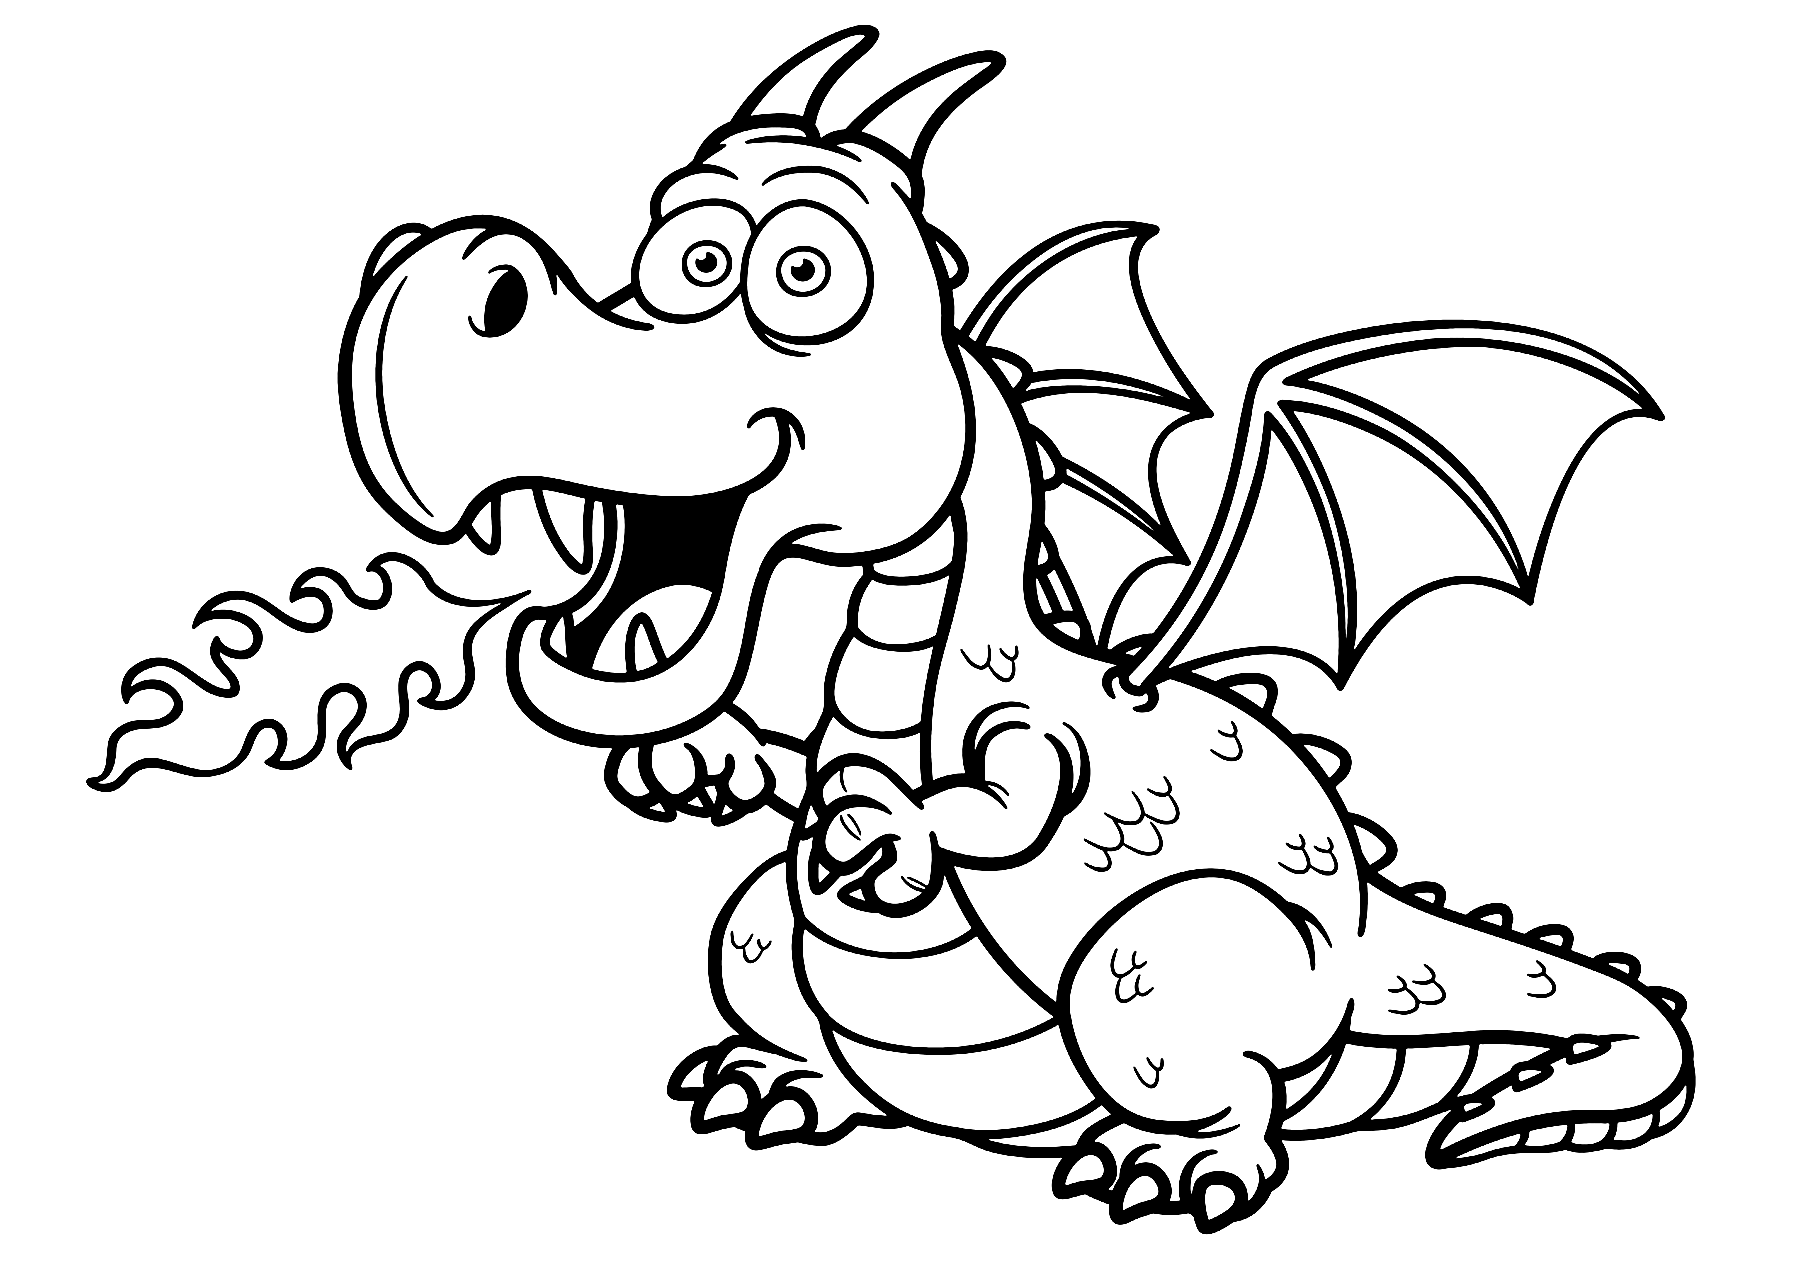 Printable Dragon Coloring Pages (Easy & Adults)